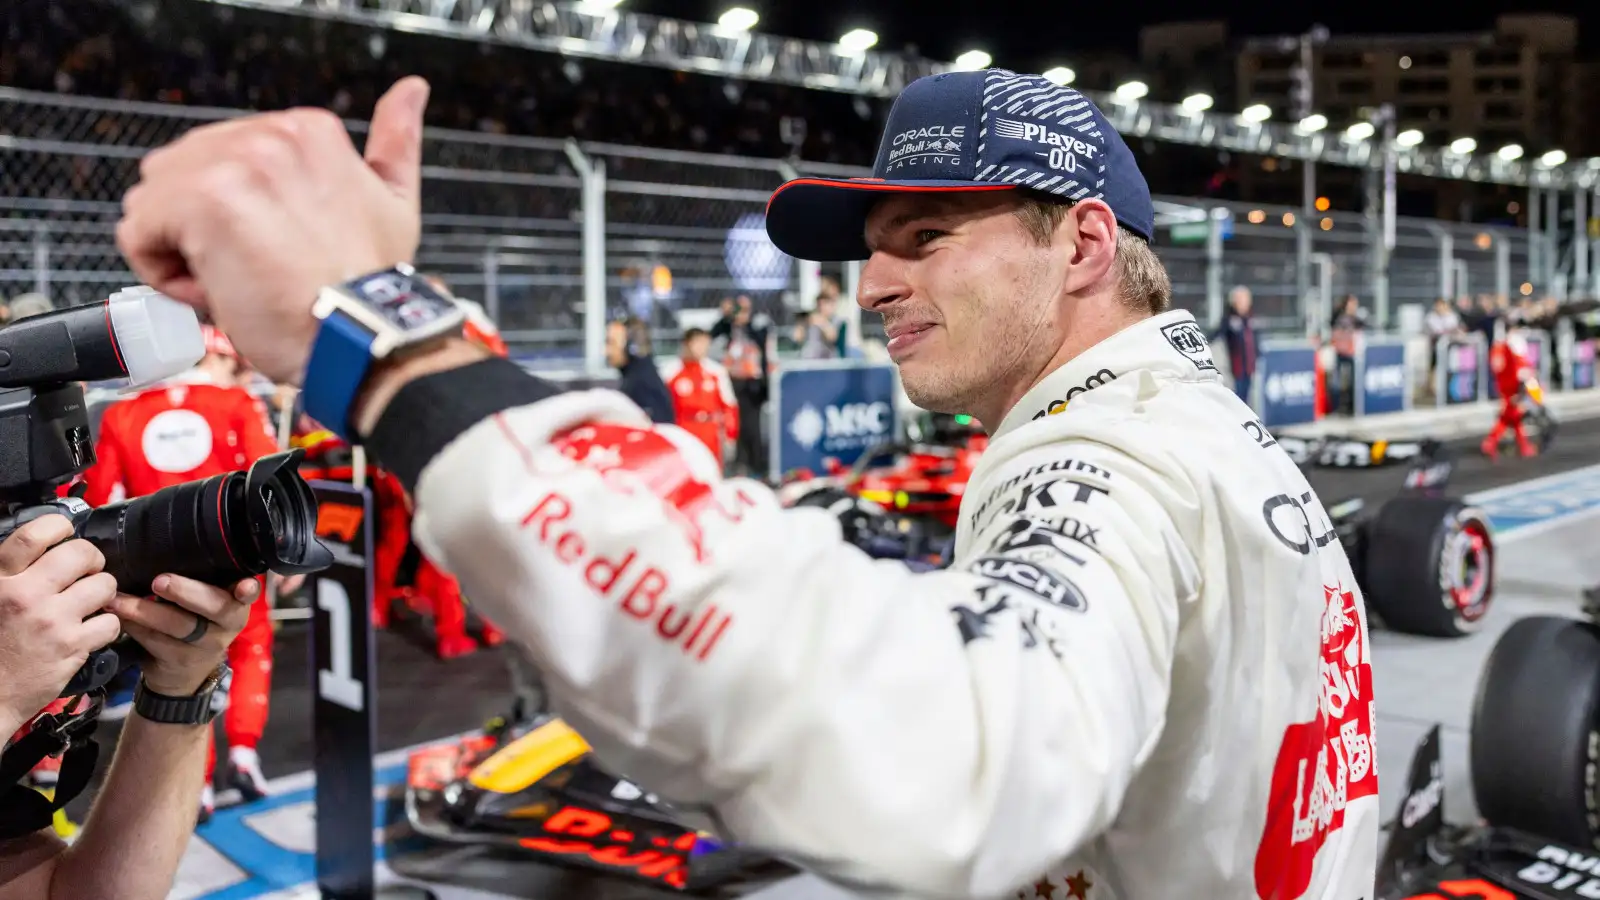 Red Bull driver Max Verstappen with a thumb up in celebration after yet another win.